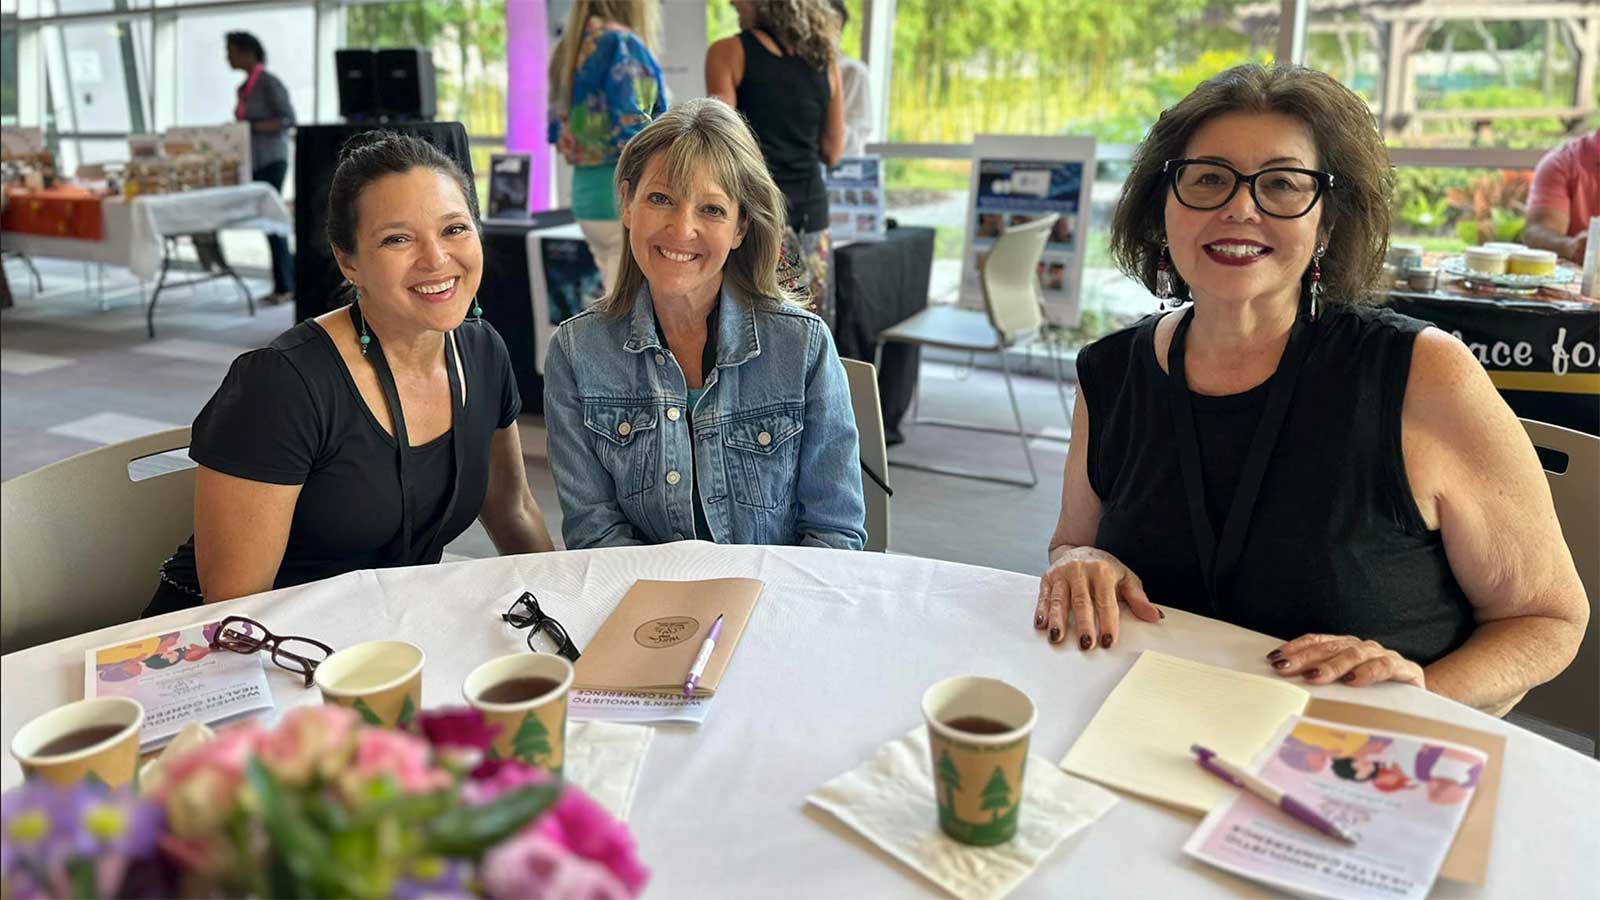 Three smiling women enjoying a corporate wellness event around a table with coffee and brochures, creating a warm, friendly atmosphere.